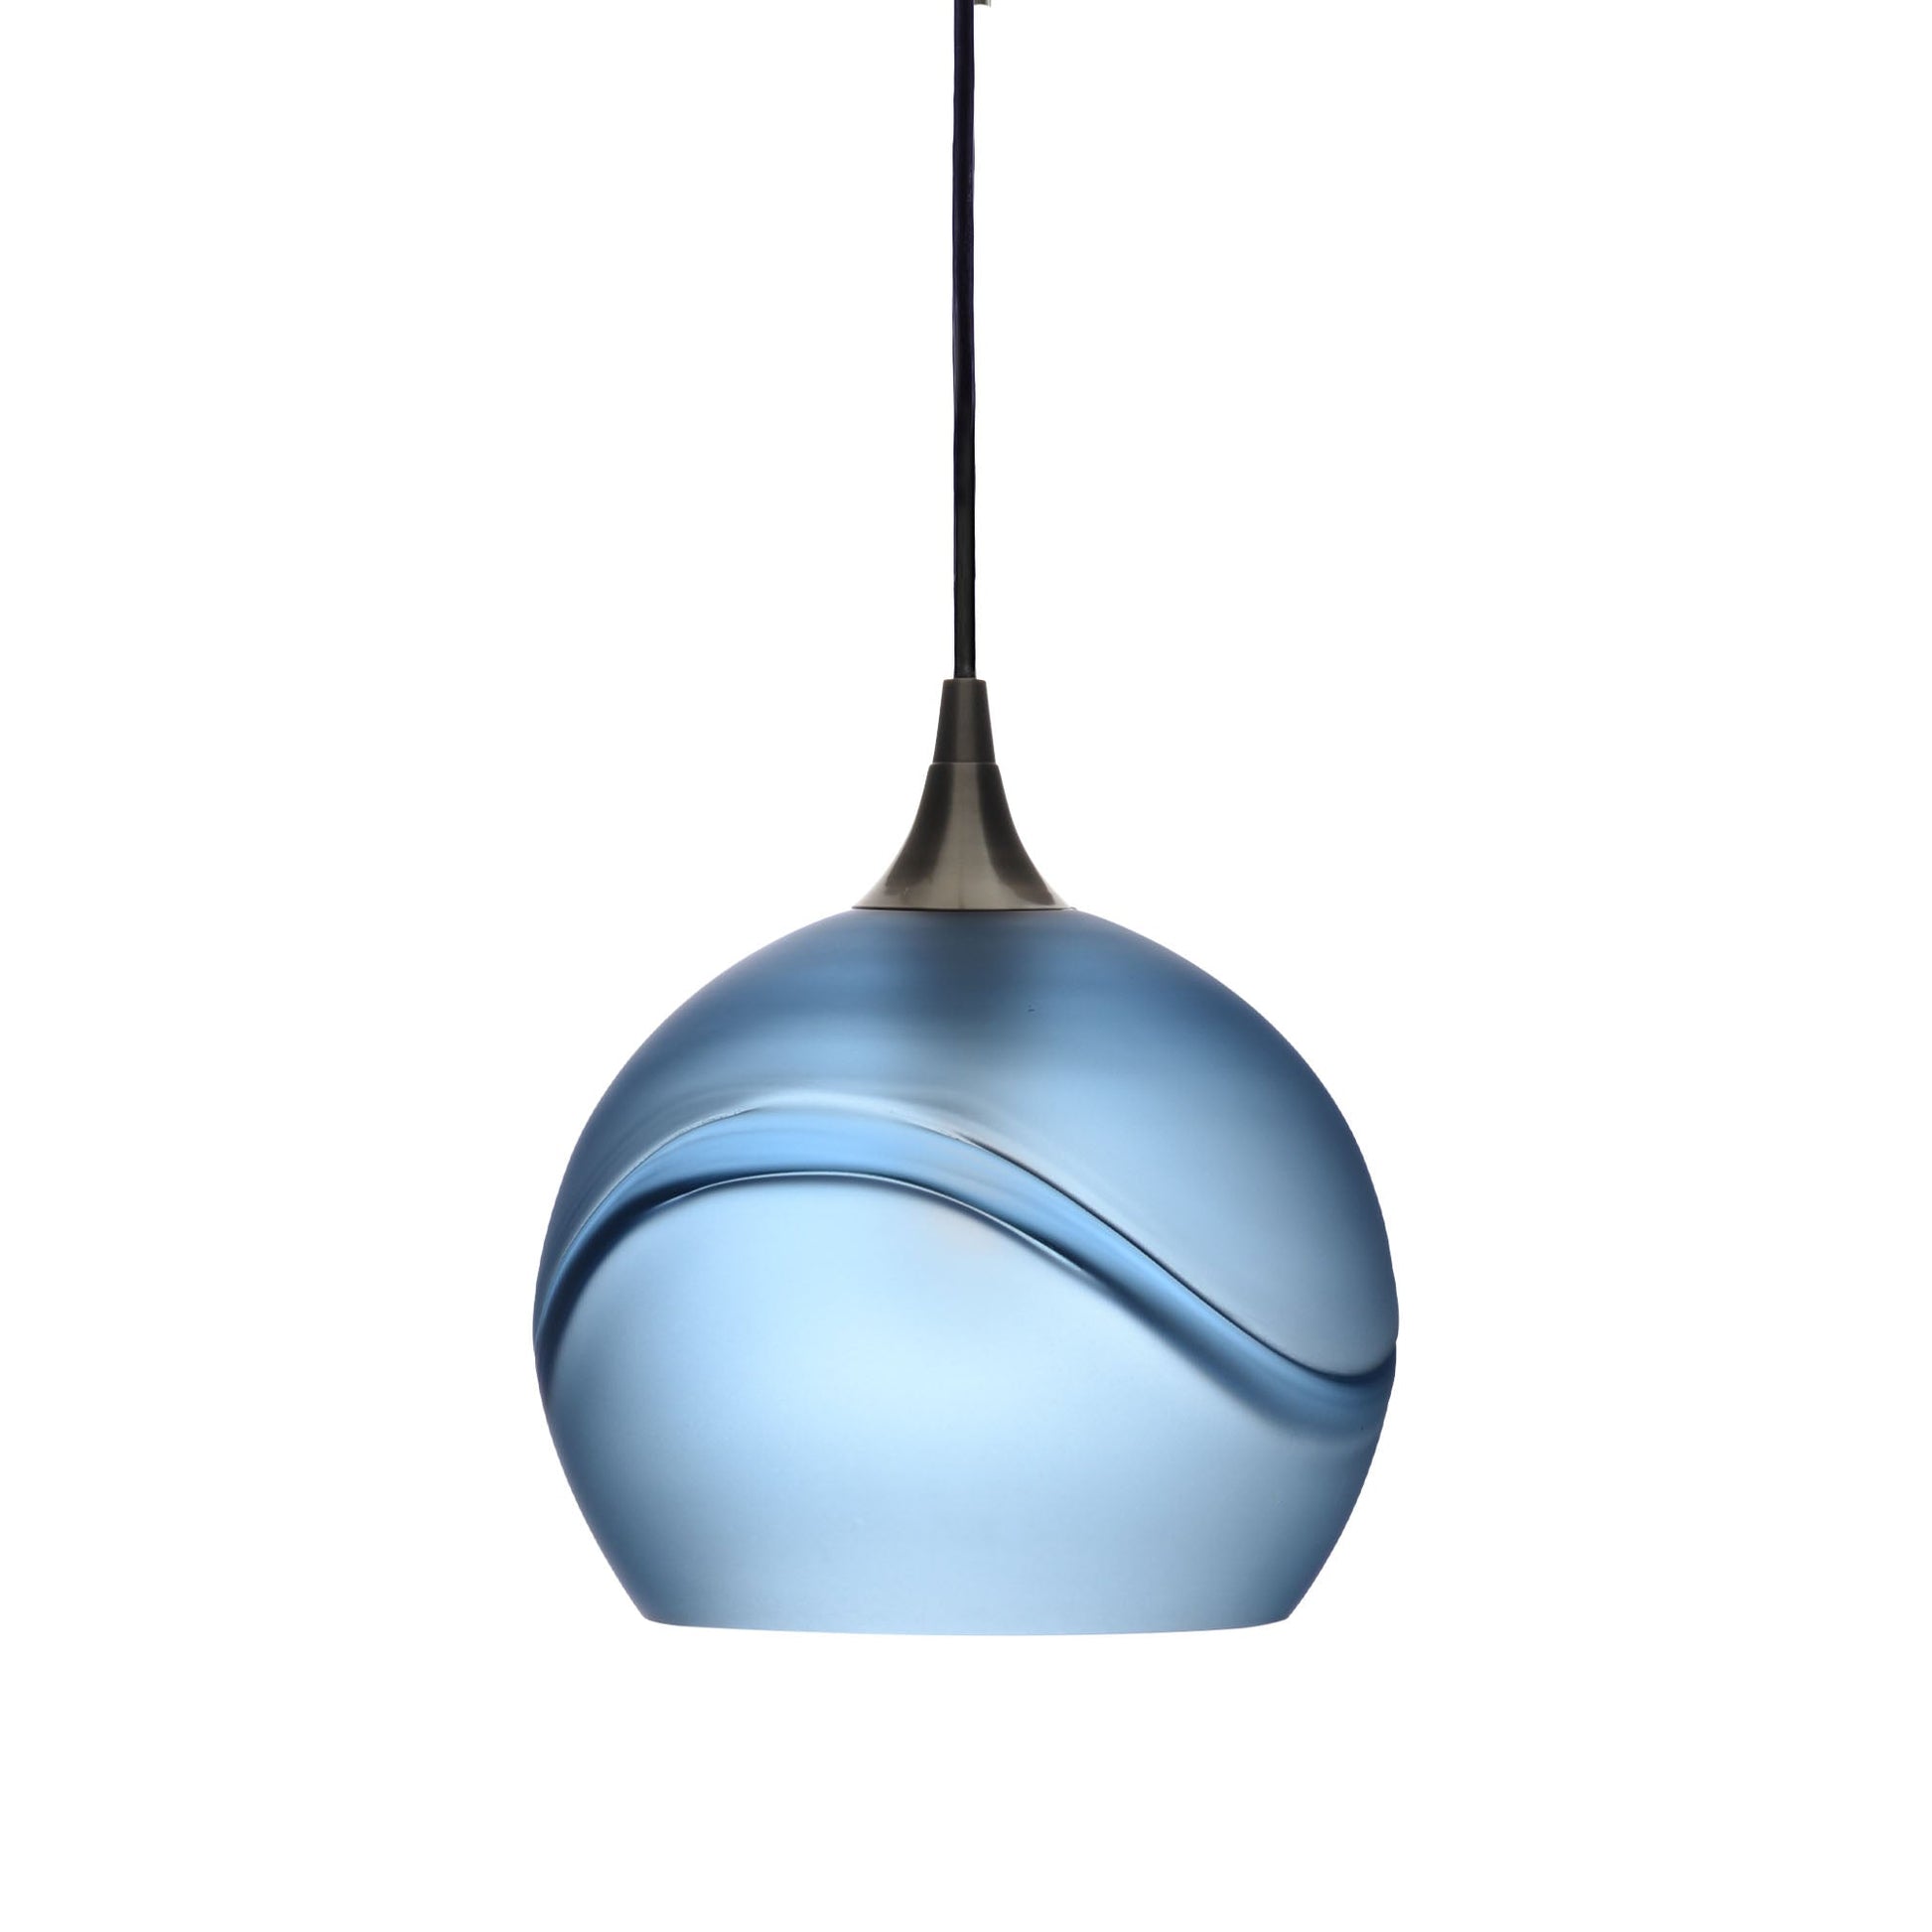 768 Glacial: Single Pendant Light-Glass-Bicycle Glass Co - Hotshop-Steel Blue-Antique Bronze-Bicycle Glass Co